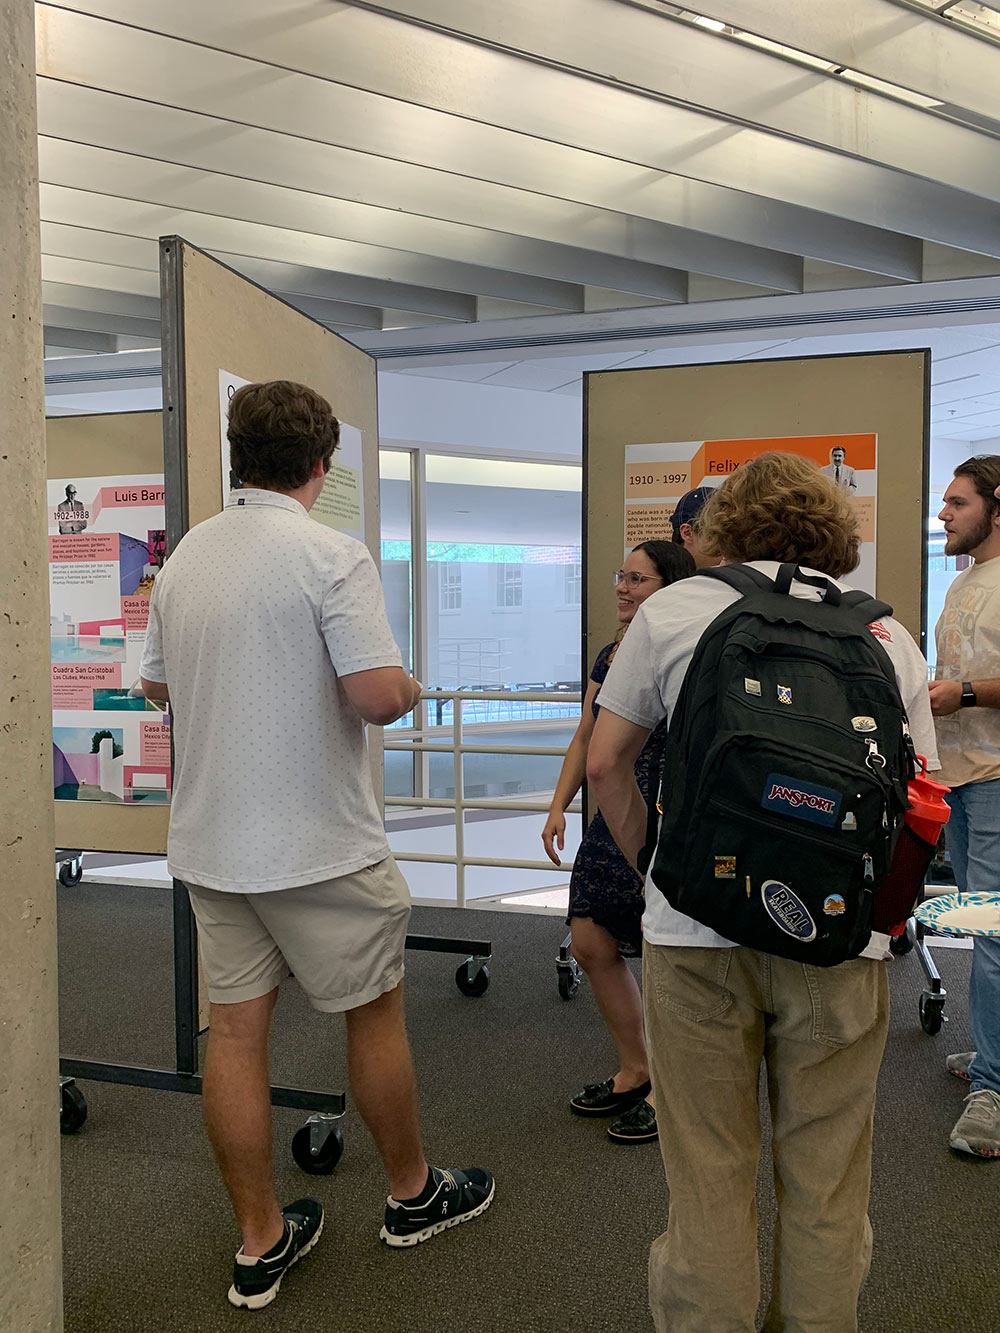 Groups of students admiring the showcased exhibits.